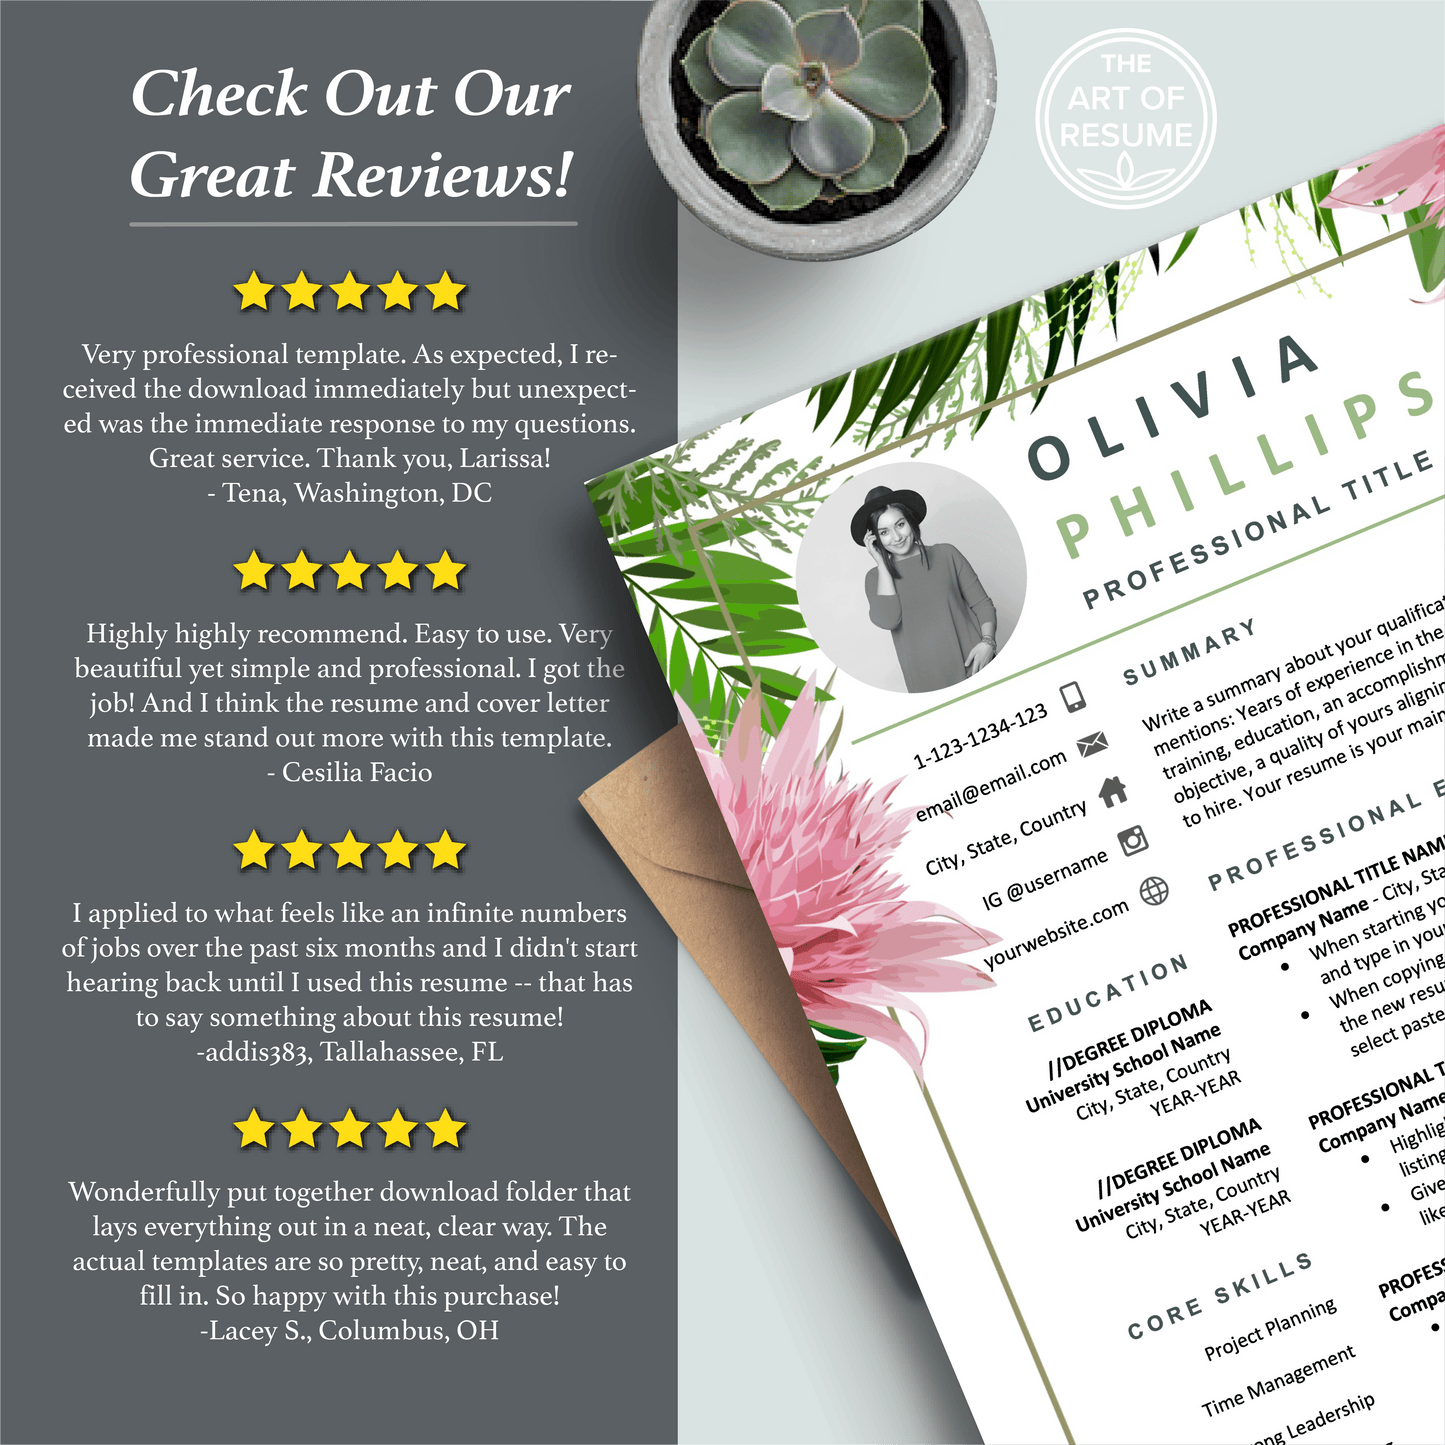 The Art of Resume Templates | Professional Best Creative Floral Resume CV Templates Online 5-Star Reviews